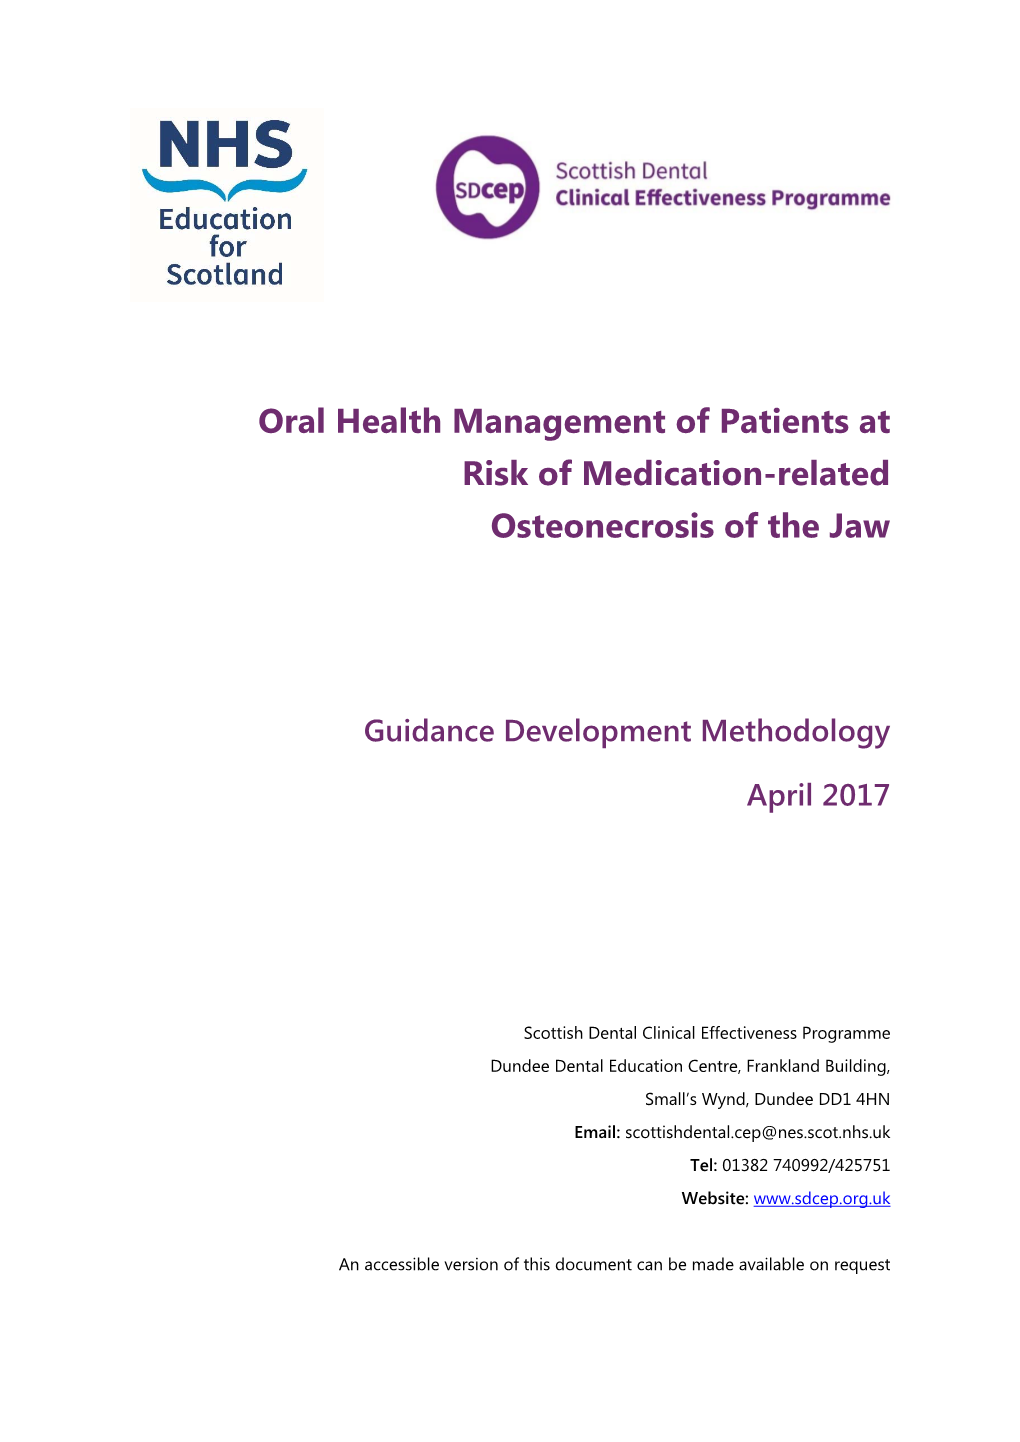 Oral Health Management of Patients at Risk of Medication-Related Osteonecrosis of the Jaw